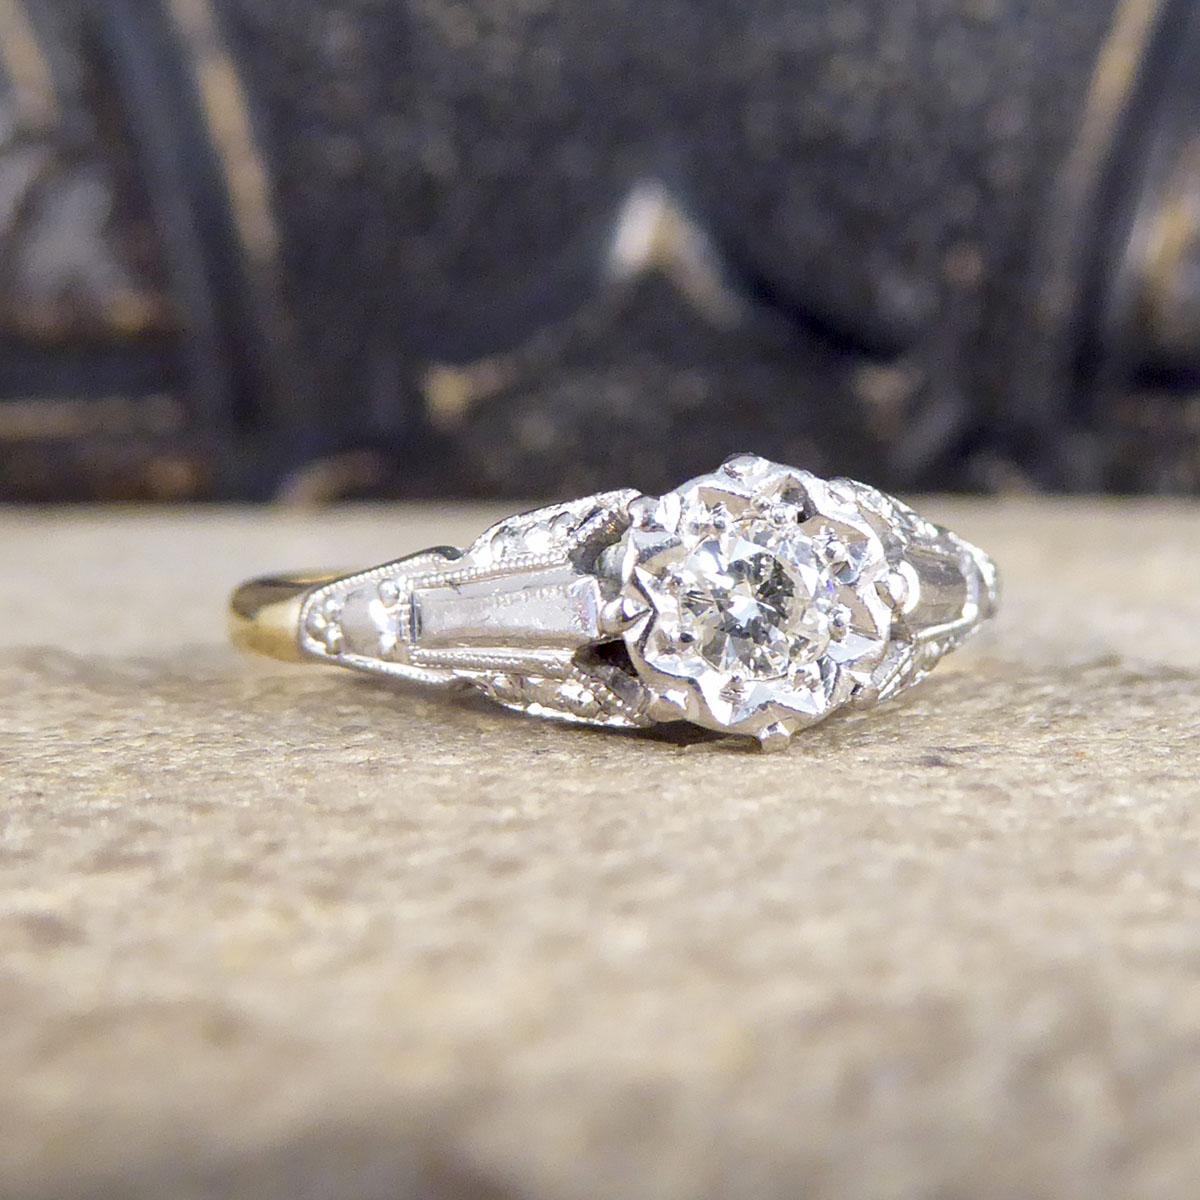 A pretty 18ct Yellow Gold and Platinum ring that was made in the 1920's. This ring features an Old European Cut Diamond in the centre weighing approximately 0.15ct Diamond in the centre that is clear and bright in an illusion setting creating the